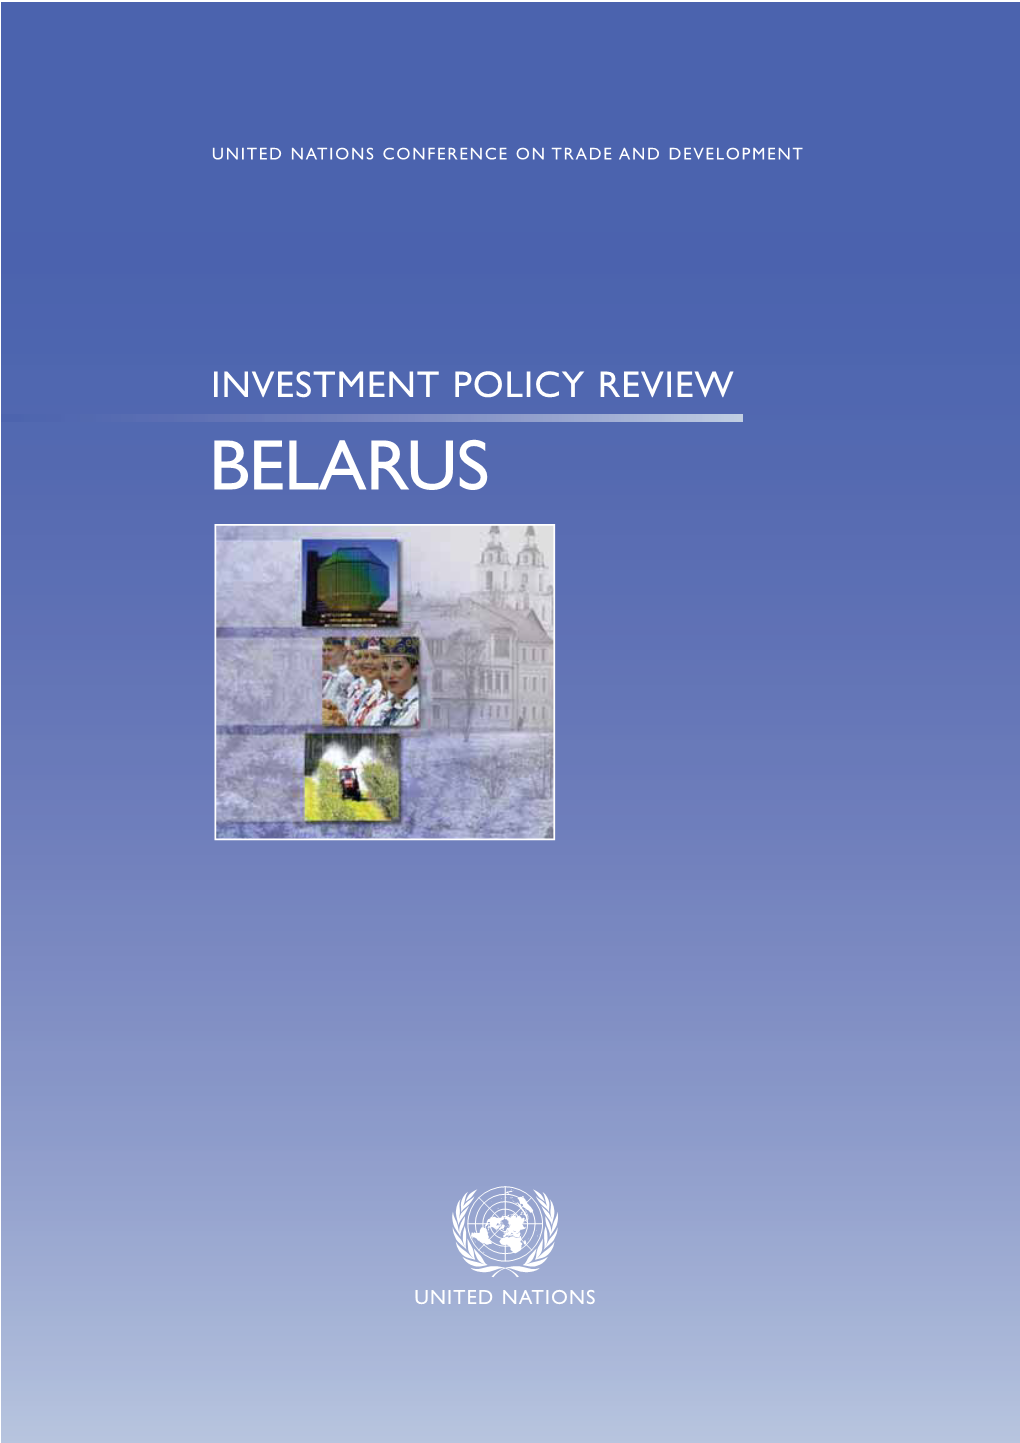 Investment Policy Review of the Republic of Belarus